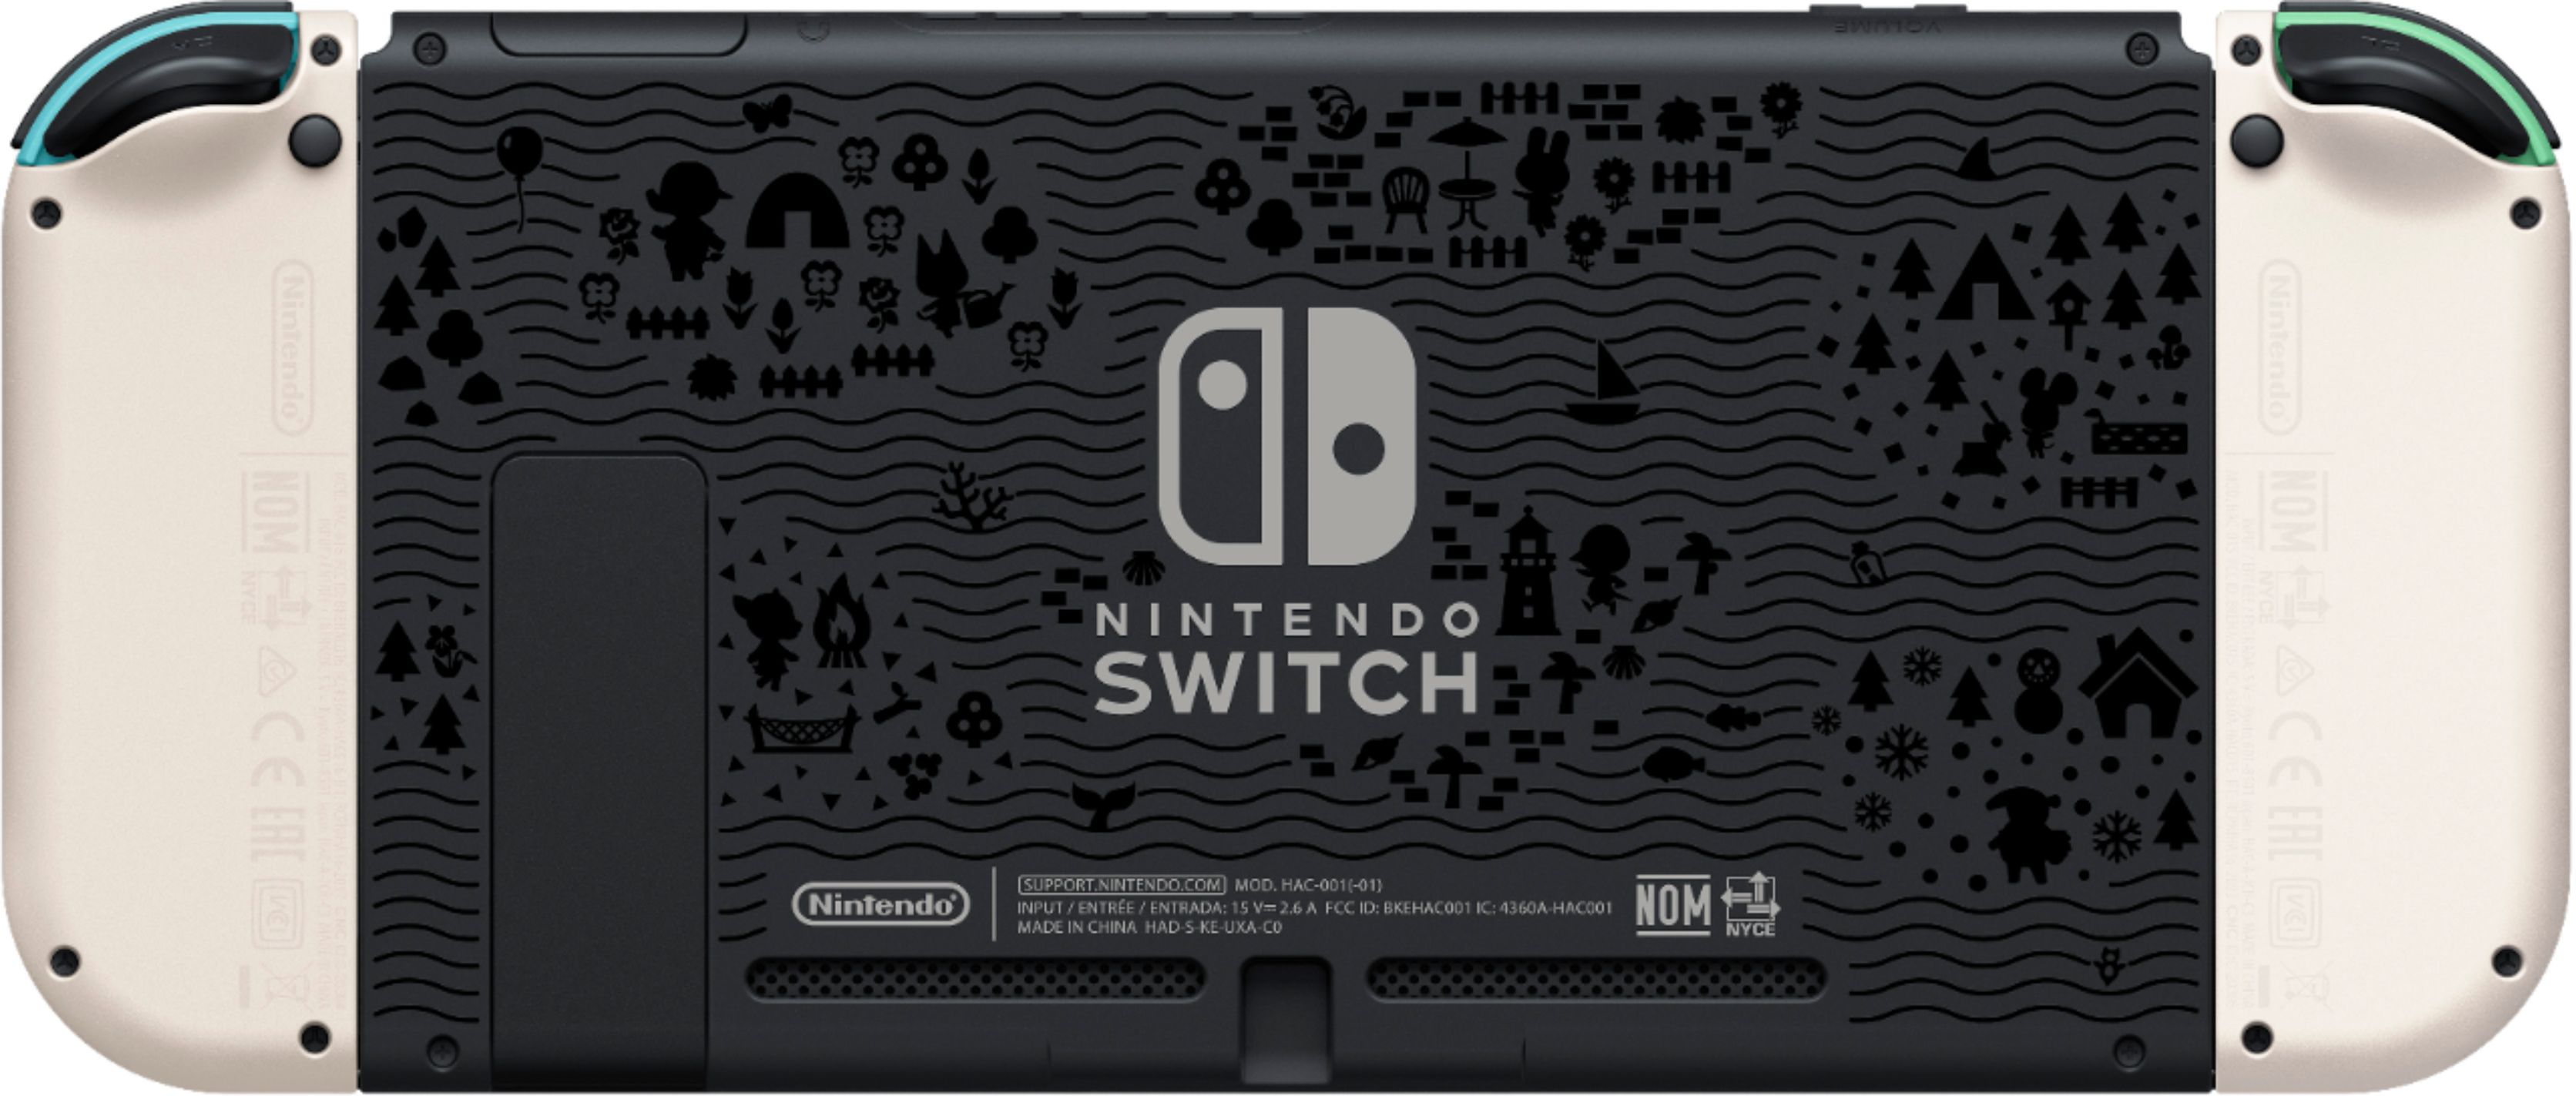 acnh special edition switch